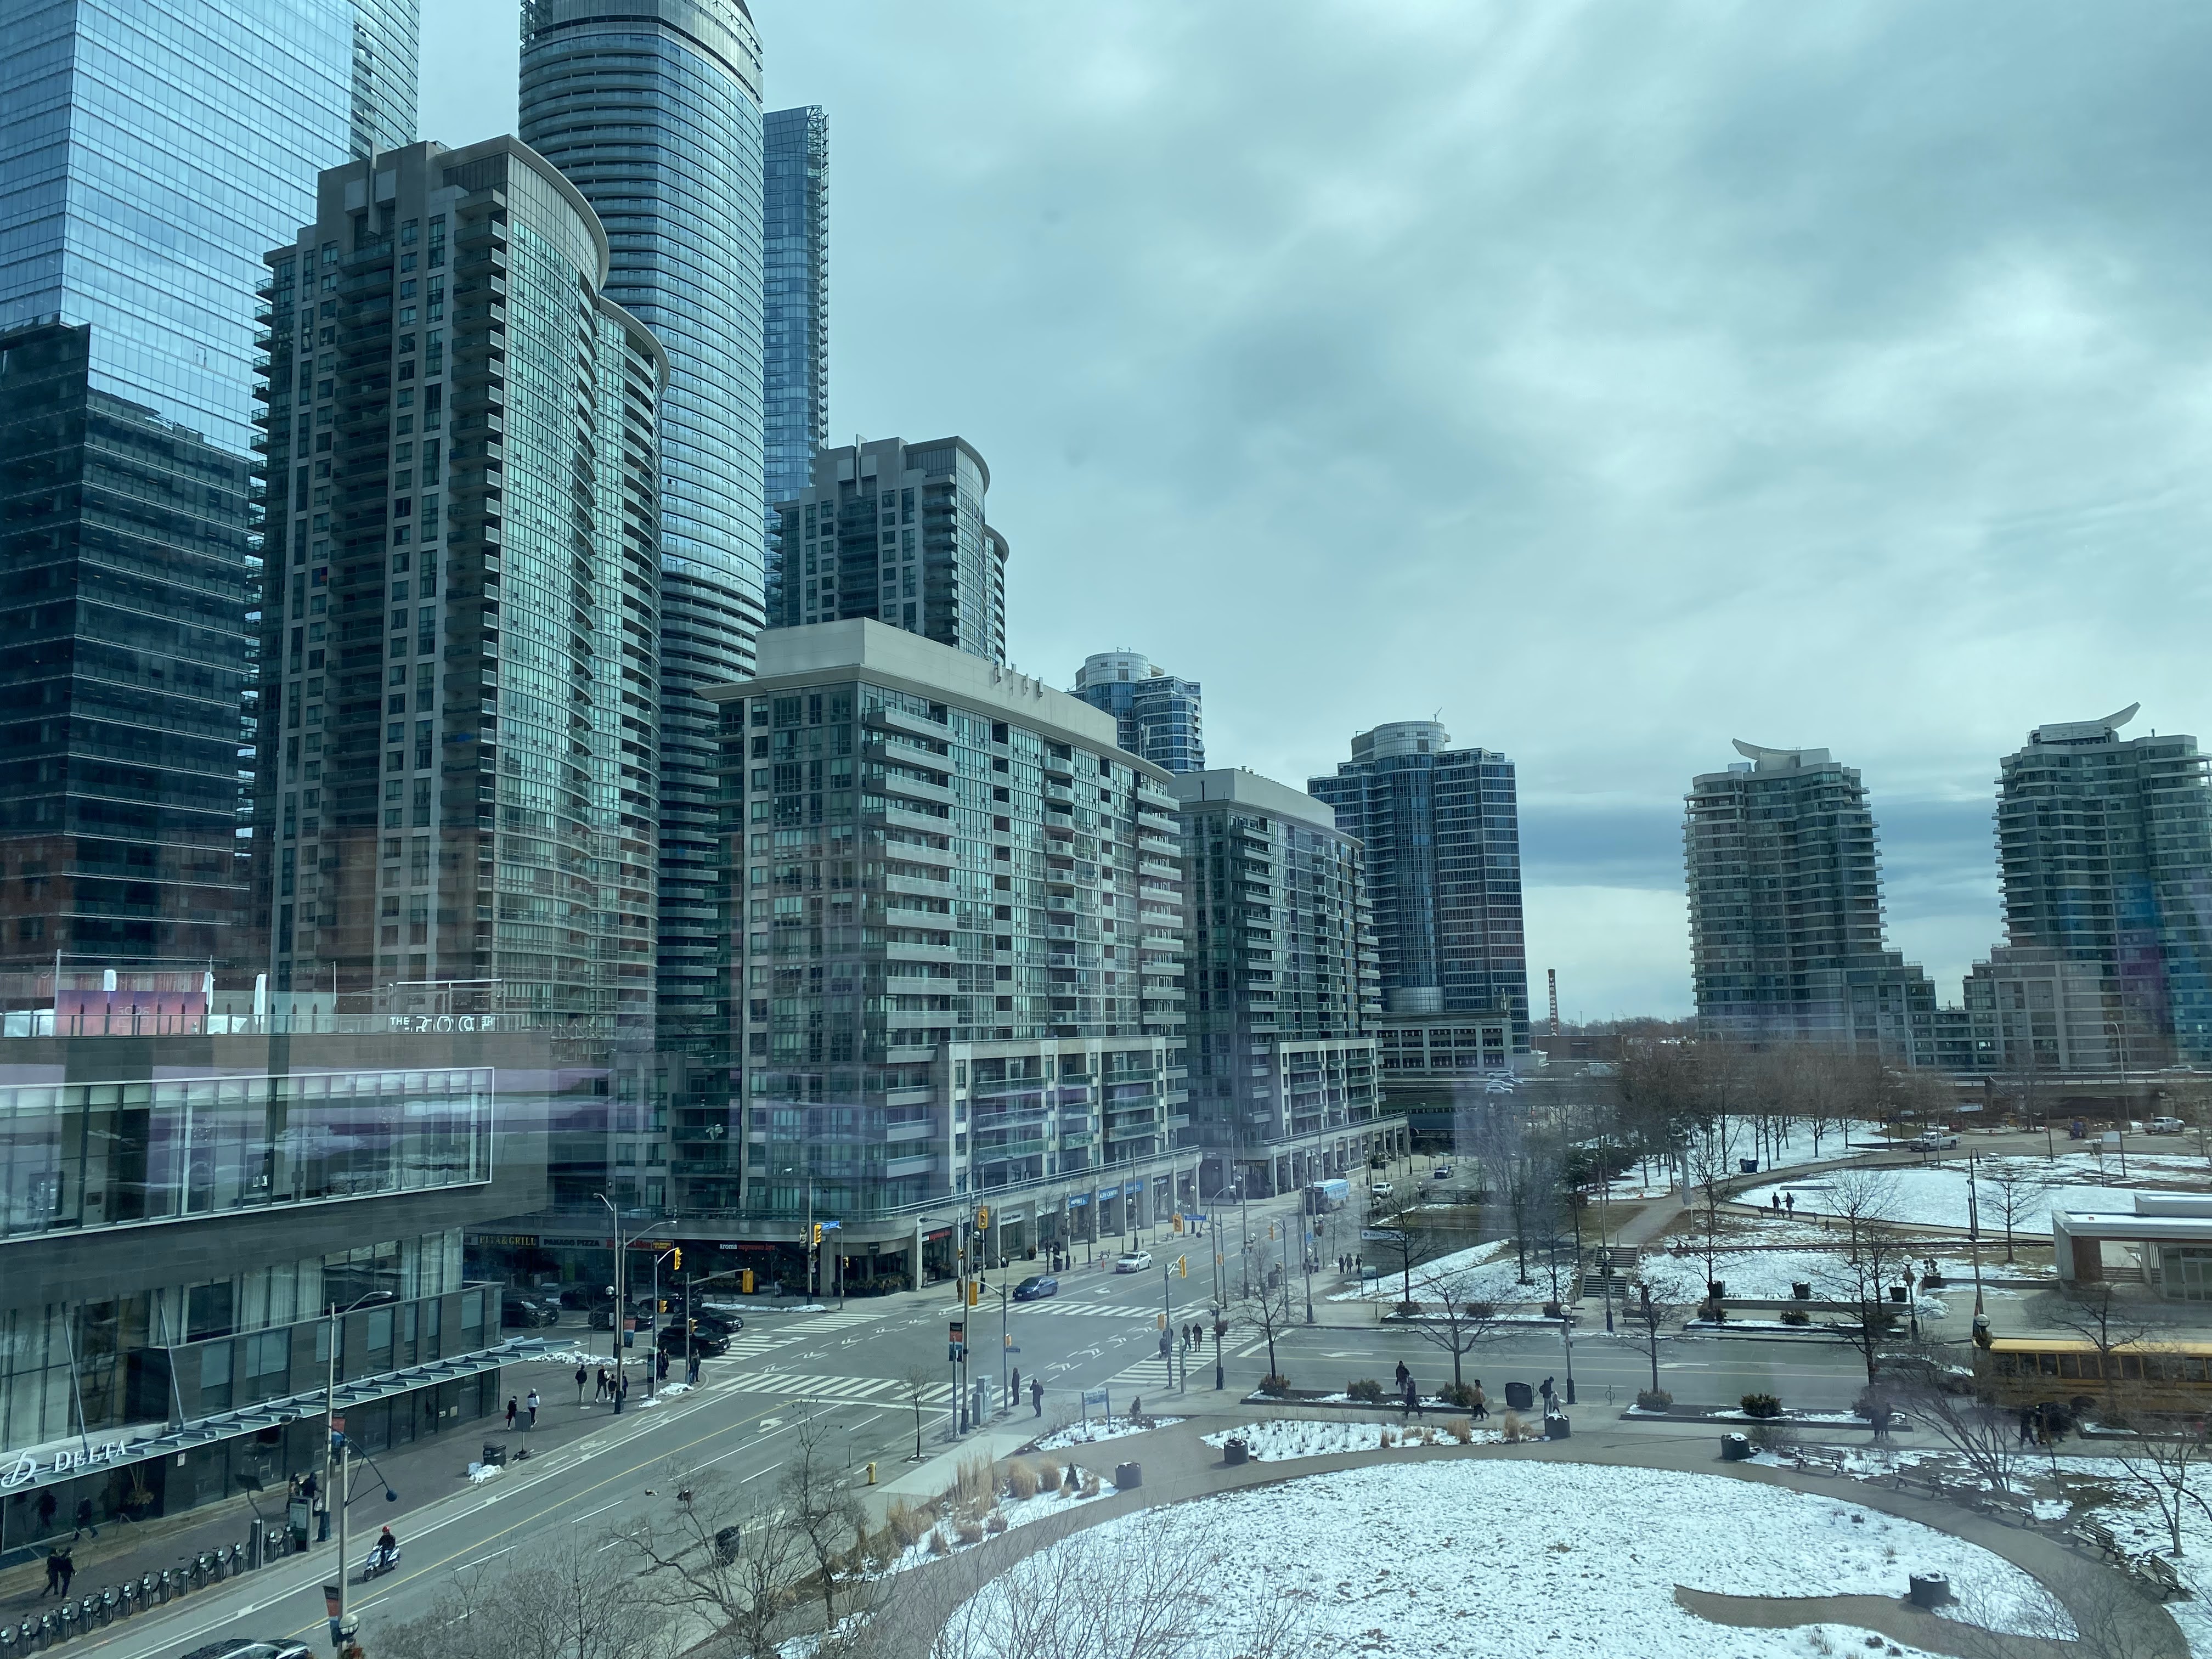 View from the Toronto Convention Center